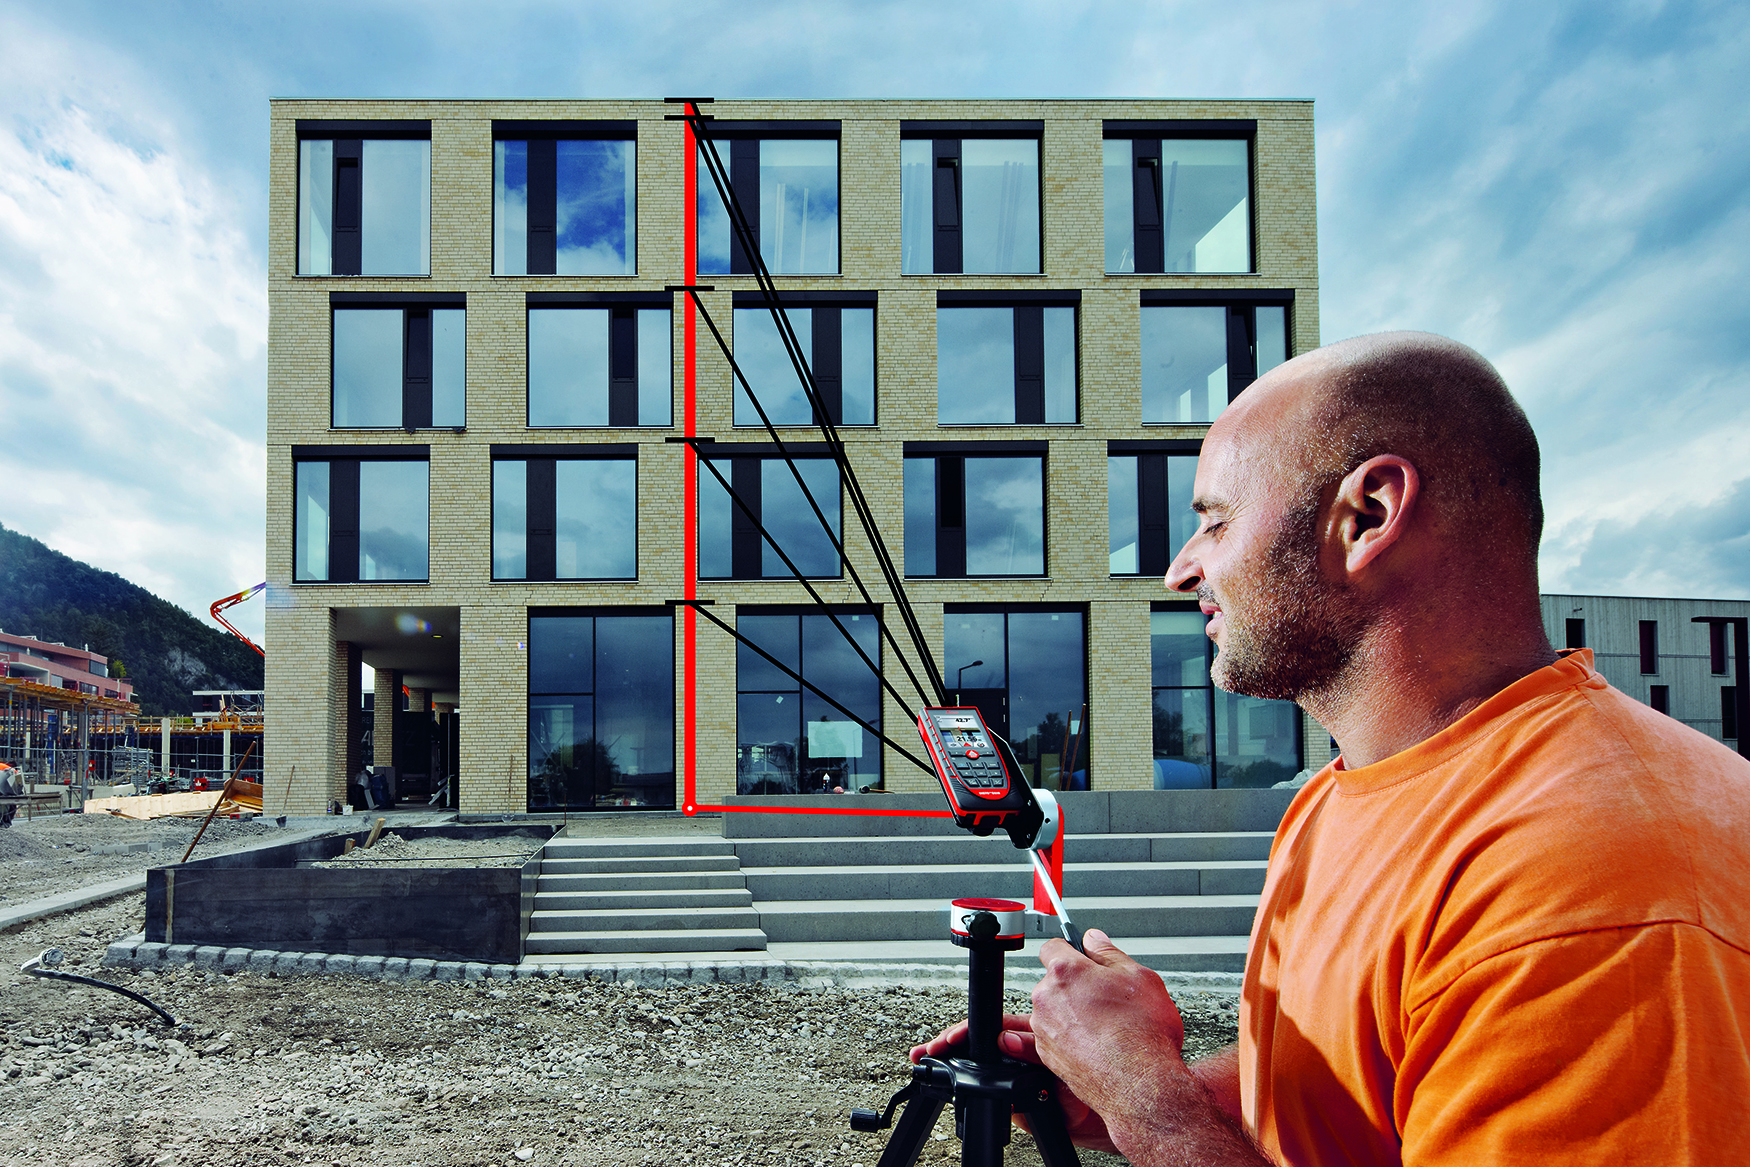 Man tracks height of a multi-storey building with a Leica DISTO D510 laser measure